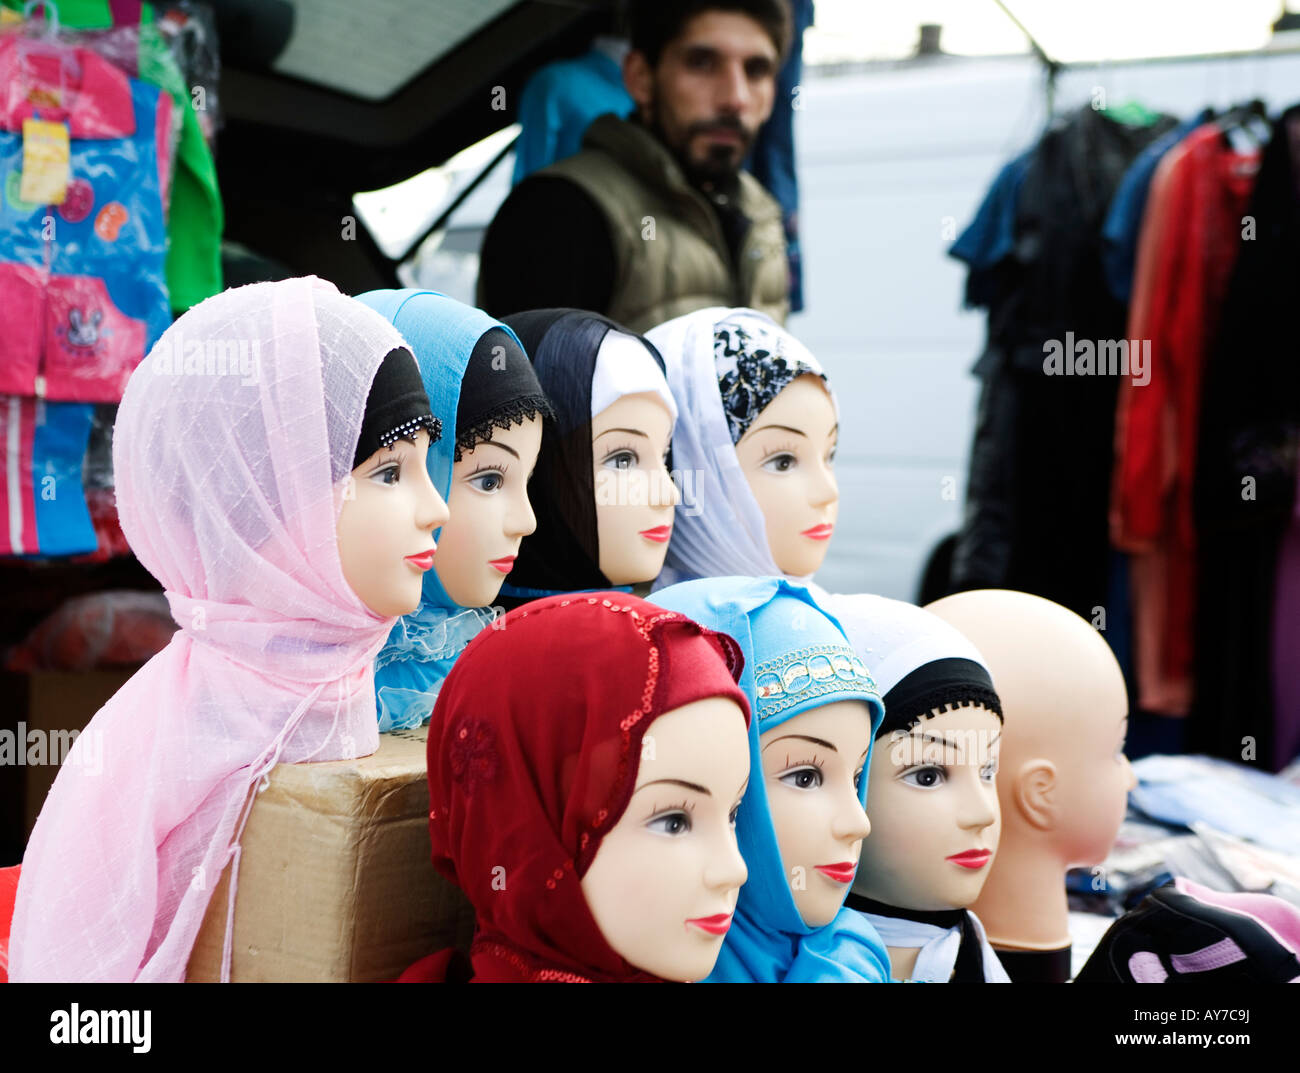 Shopkeeper exhibiting rows of dolls wearing coloured  Hijabs at Hijab Fashion Shop in a suburb of Gothenburg Sweden Stock Photo